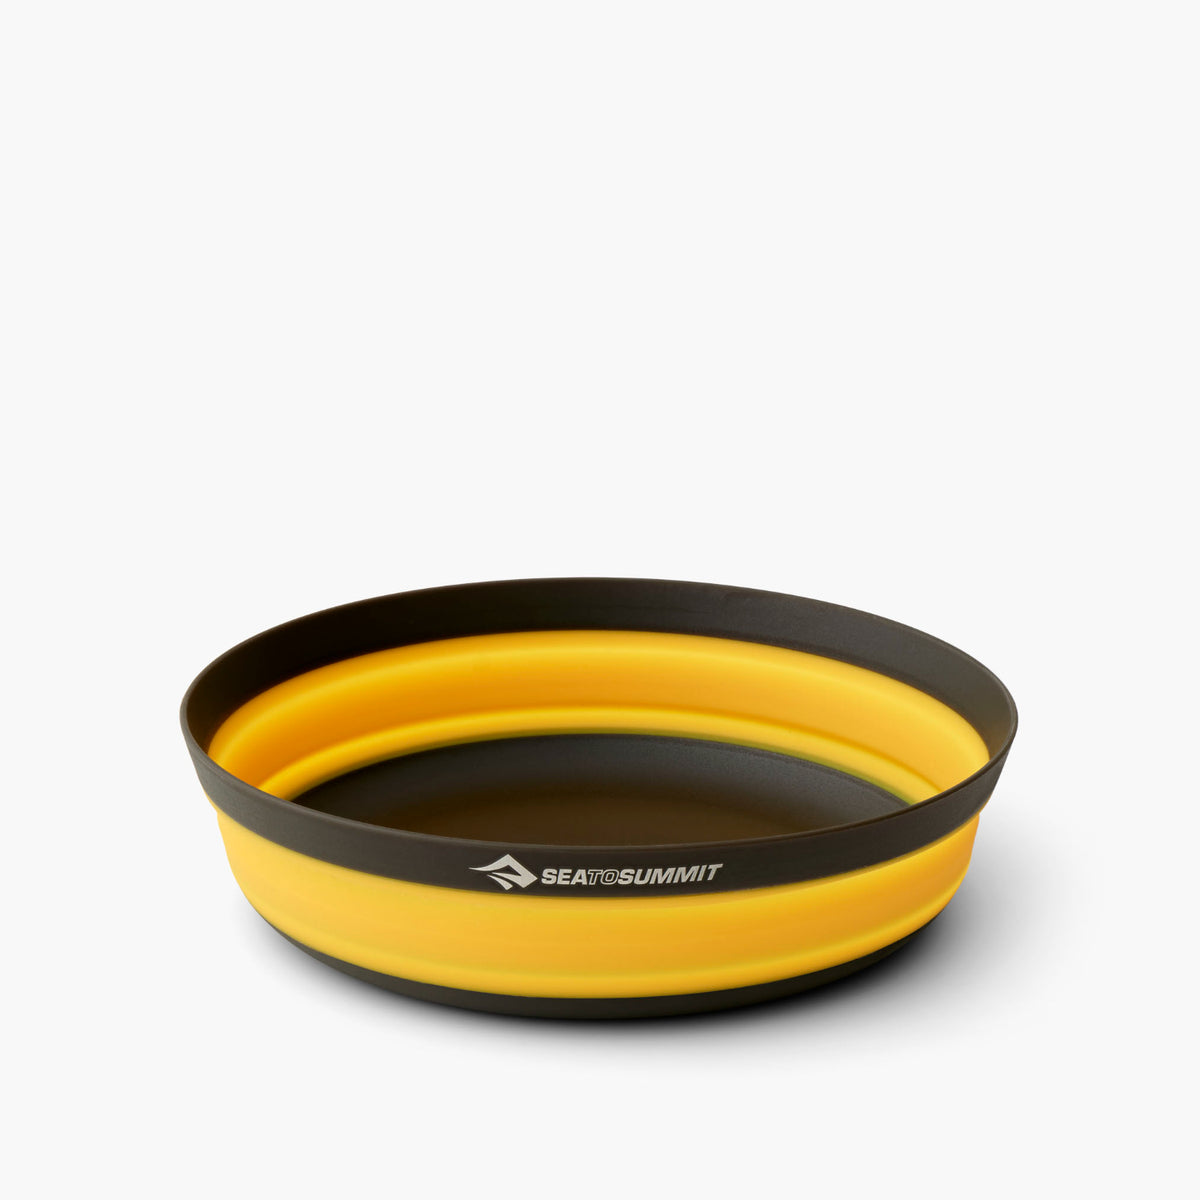 Sea to Summit Frontier Collapsible Bowl - Large in sulphur yellow